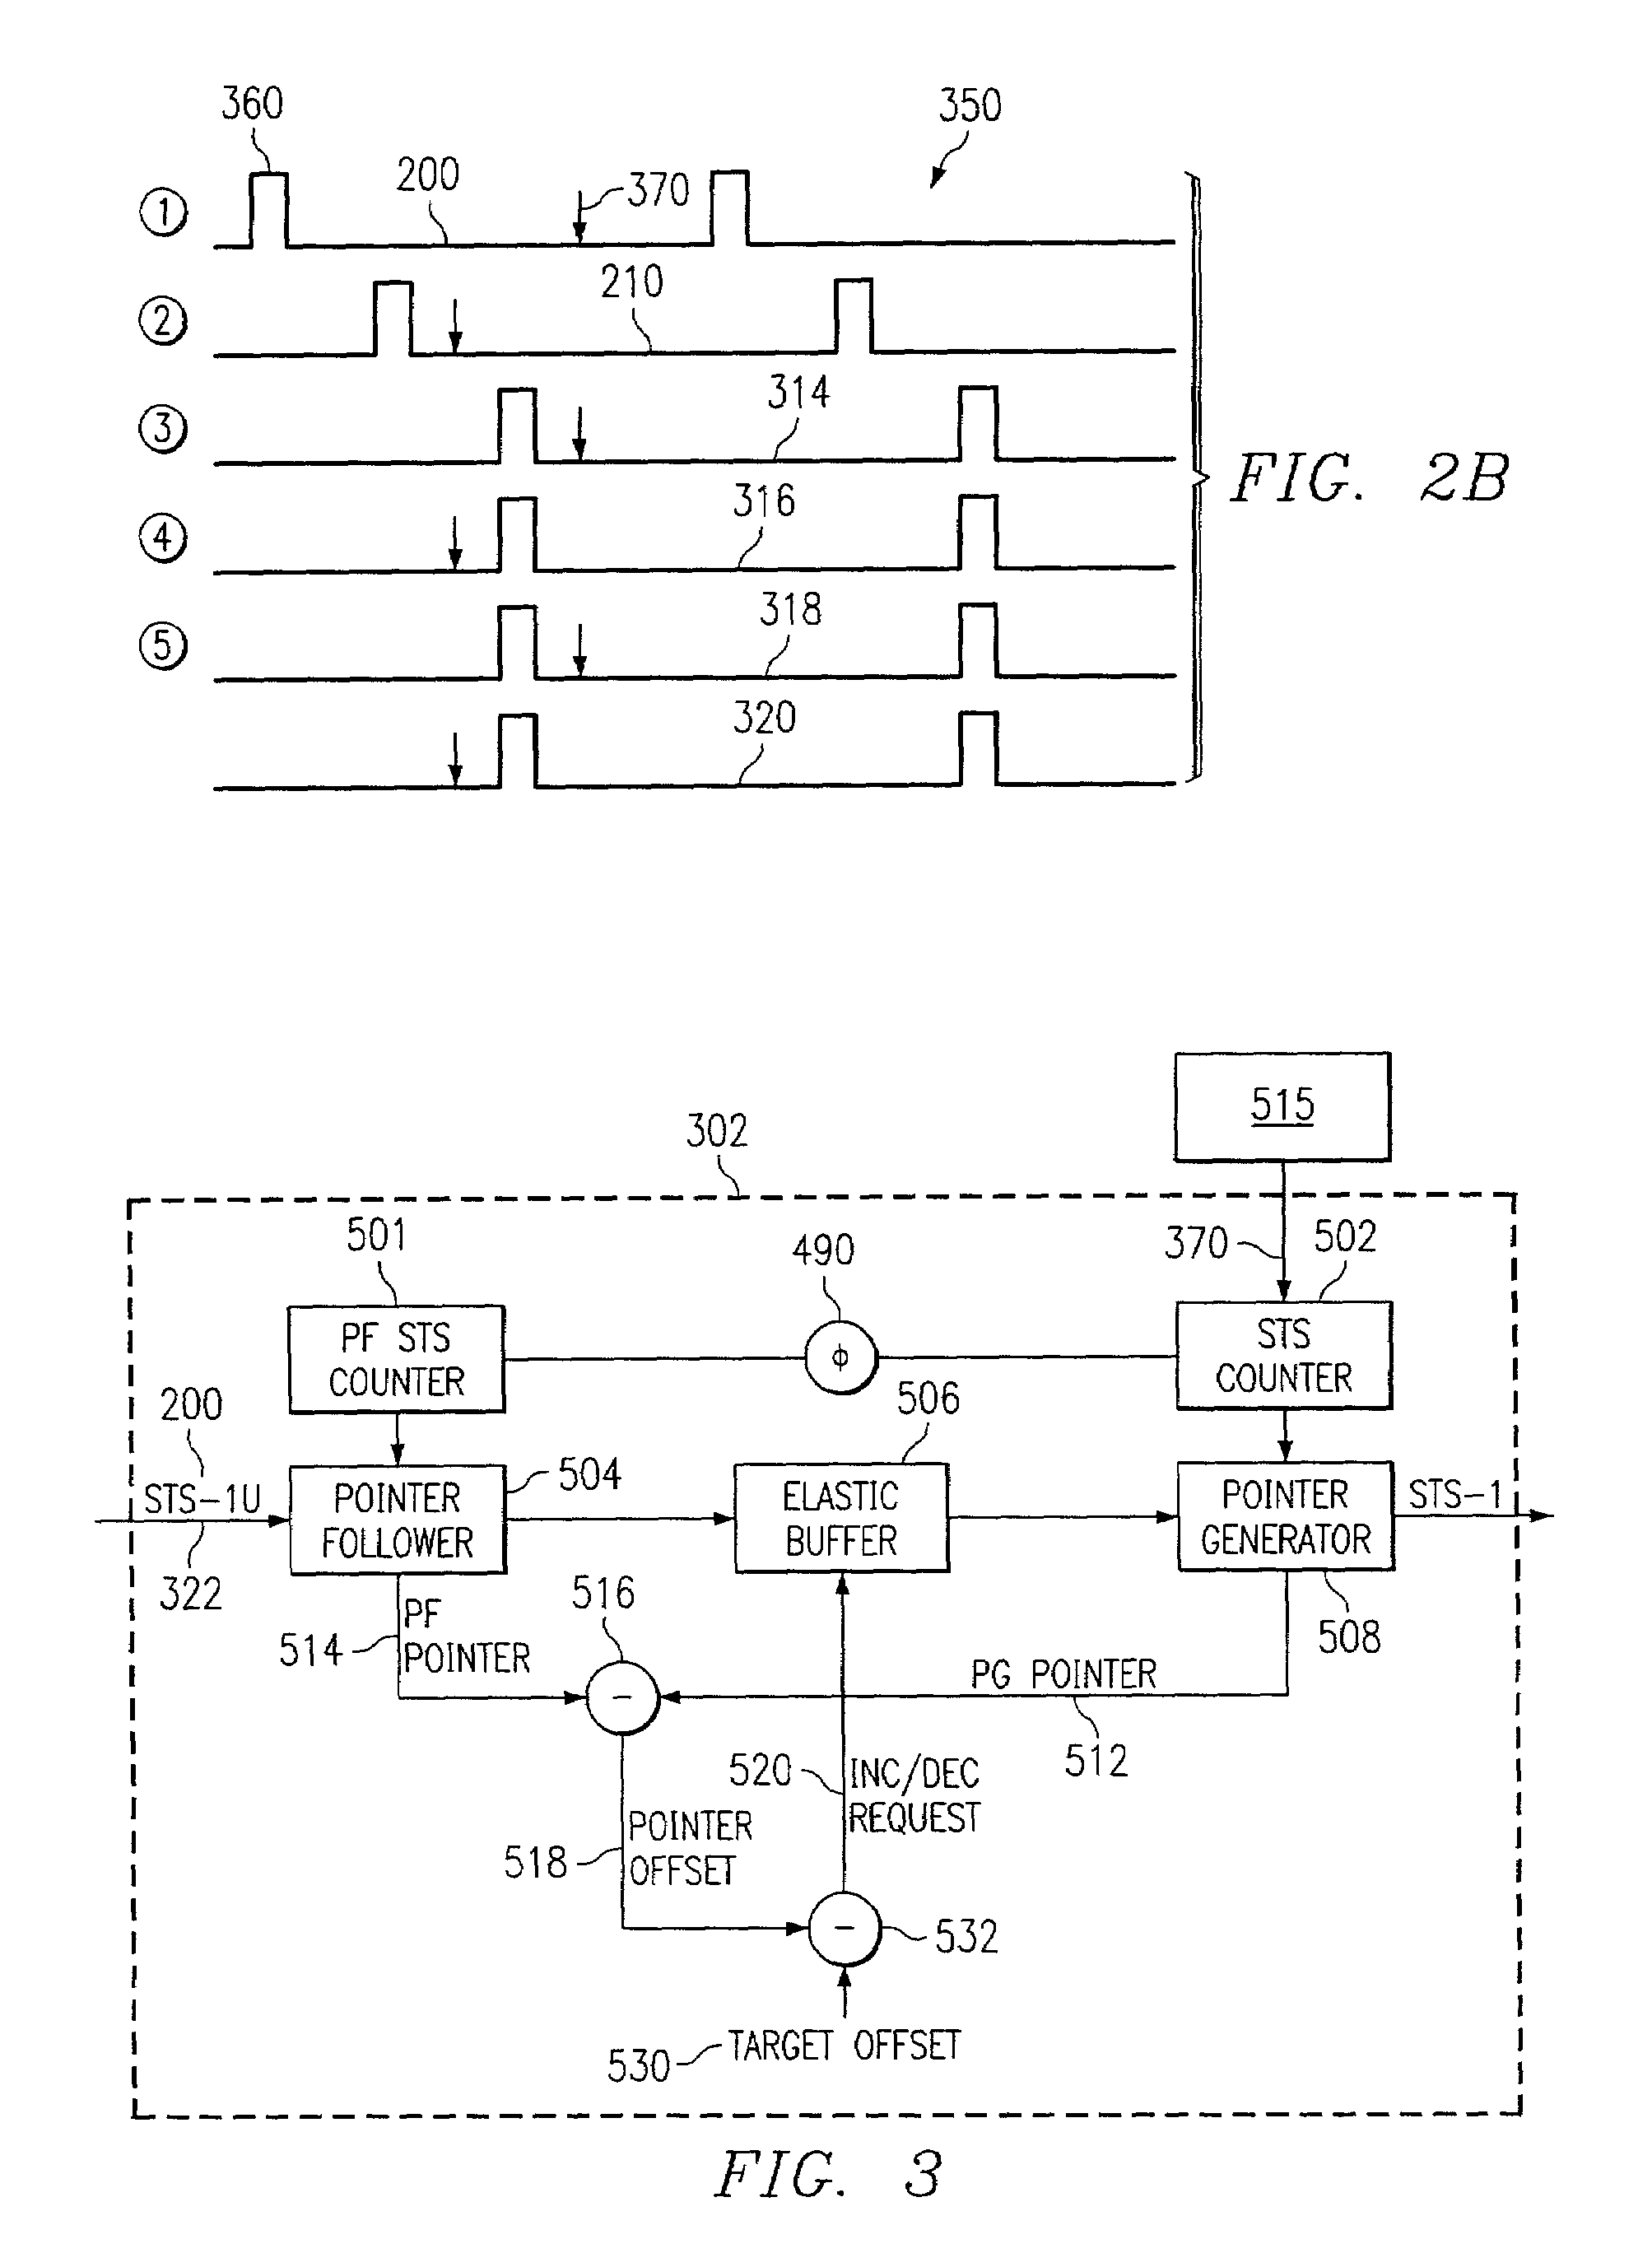 Method and system for frame and pointer alignment of SONET data channels